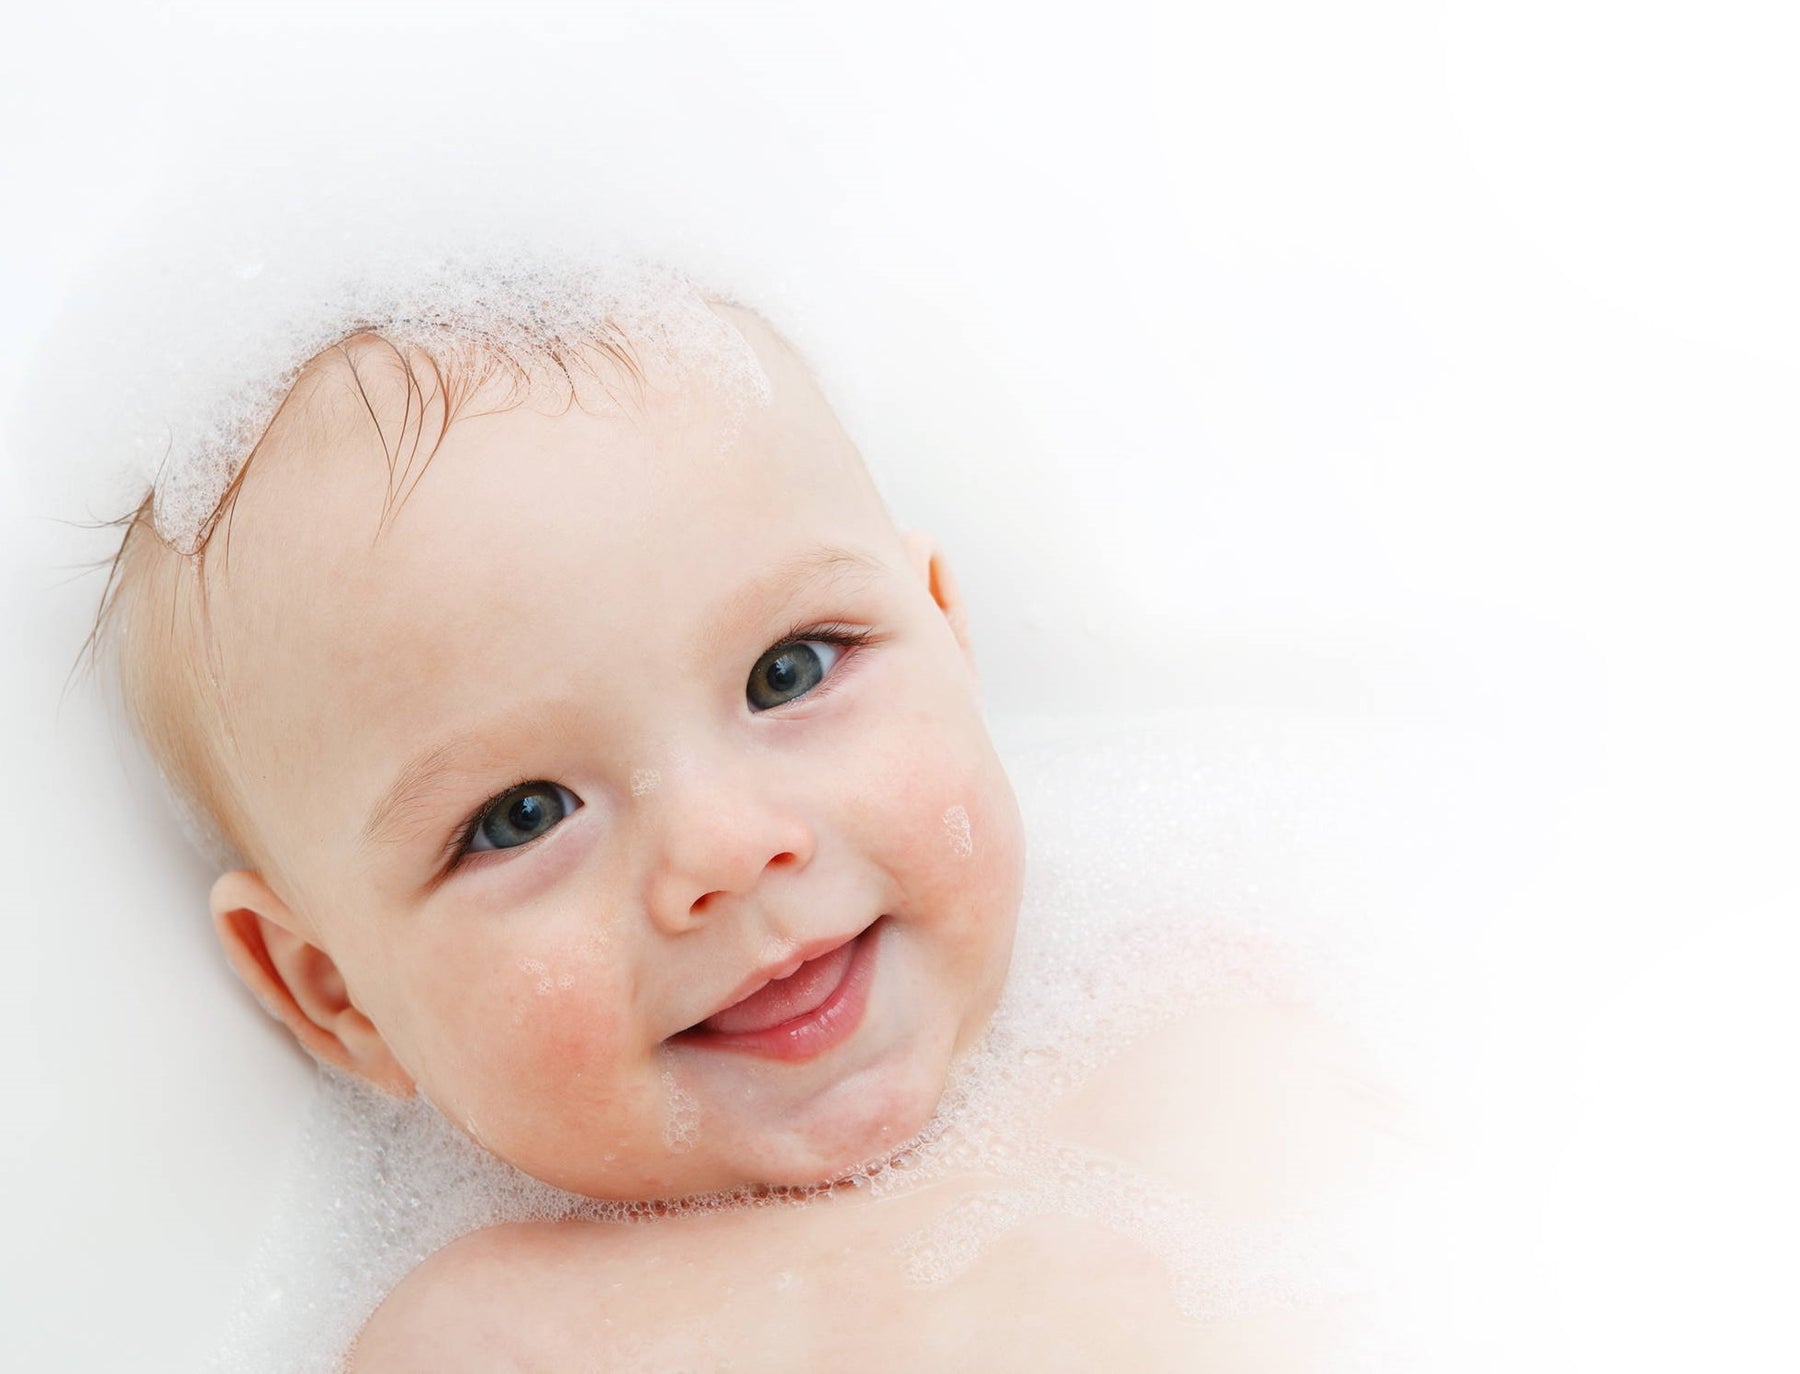 A smiling baby in a bubble bath